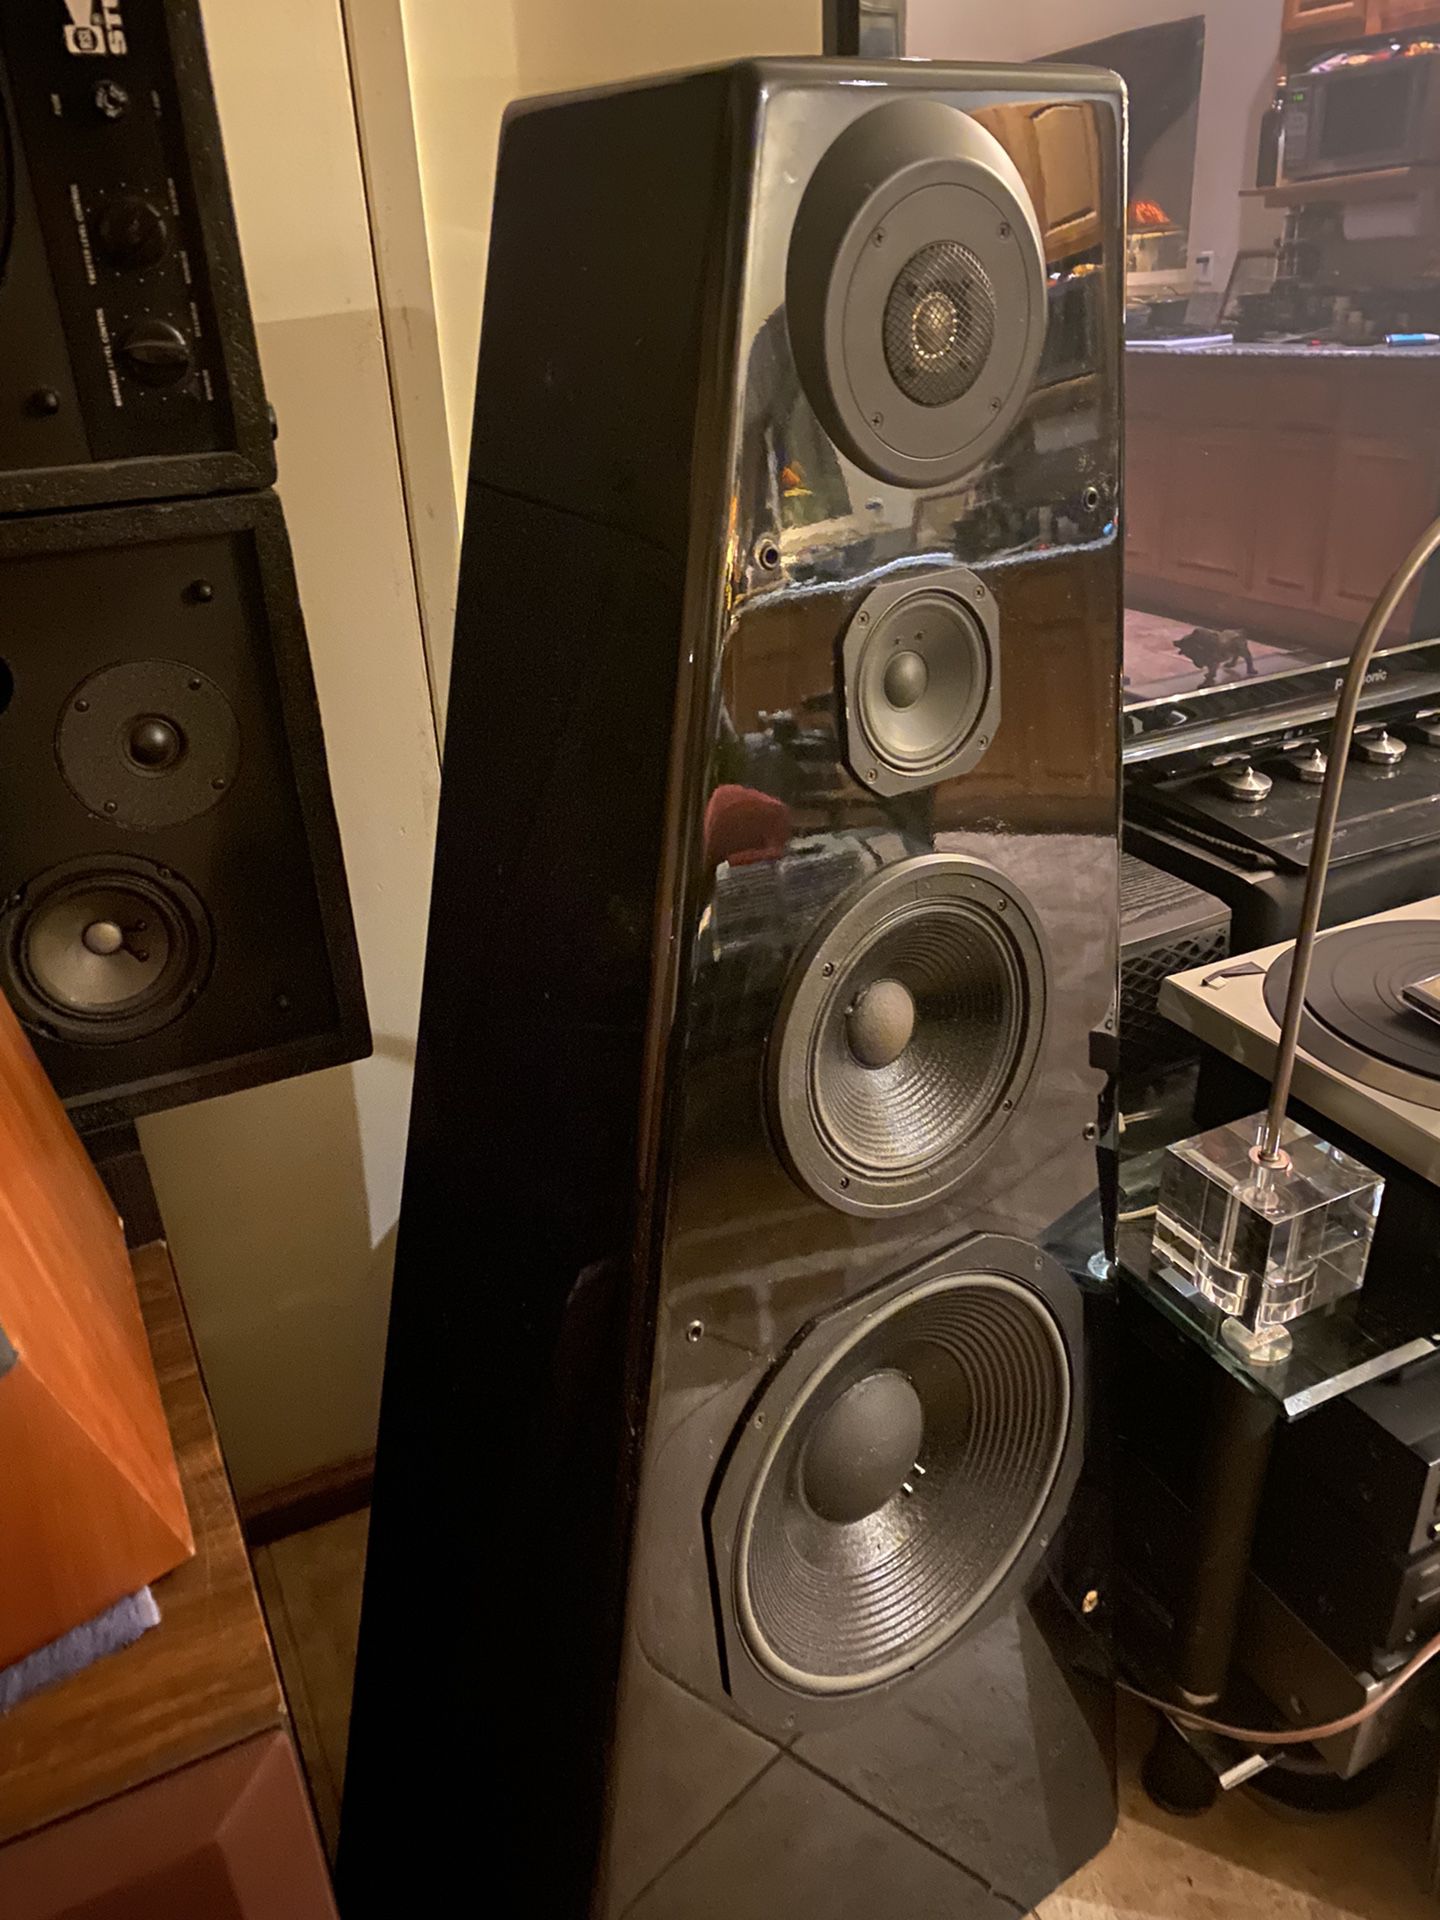 JBL limited edition 250 I need a home for Sale in Glendora, CA - OfferUp